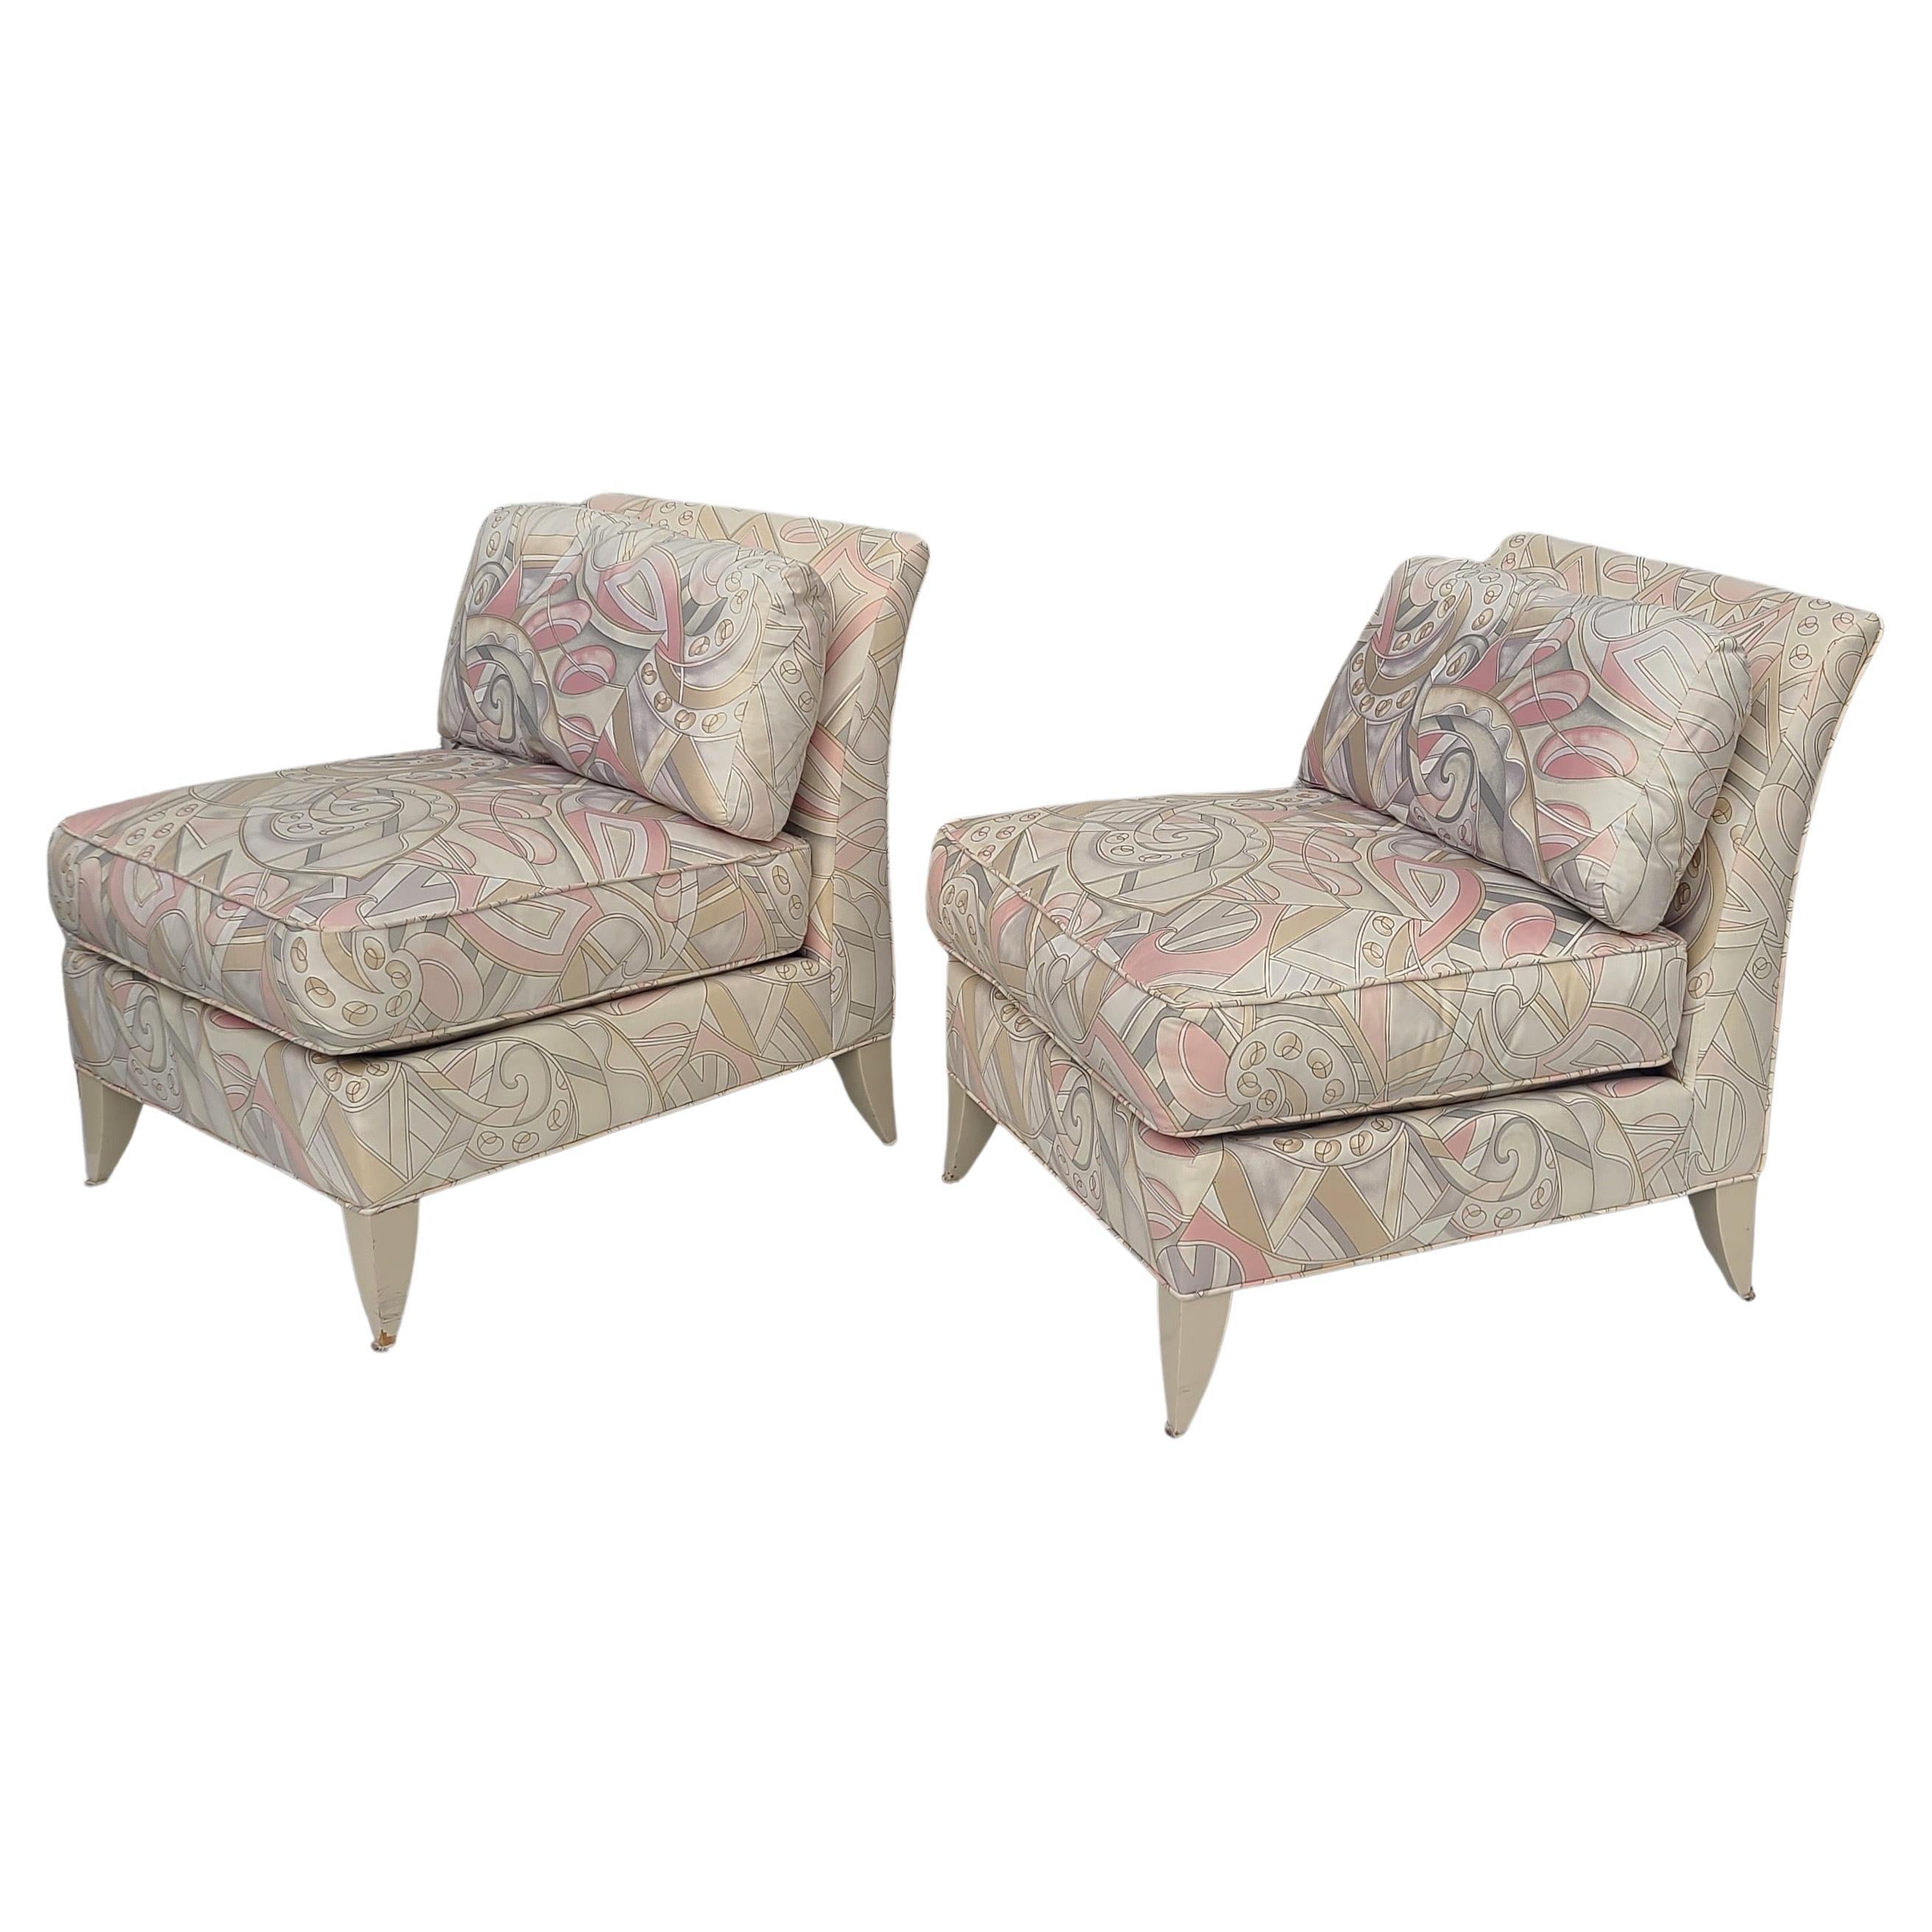 Please reach out for efficient shipping to your location.

Pair slipper lounge chairs by Thayer Coggin.